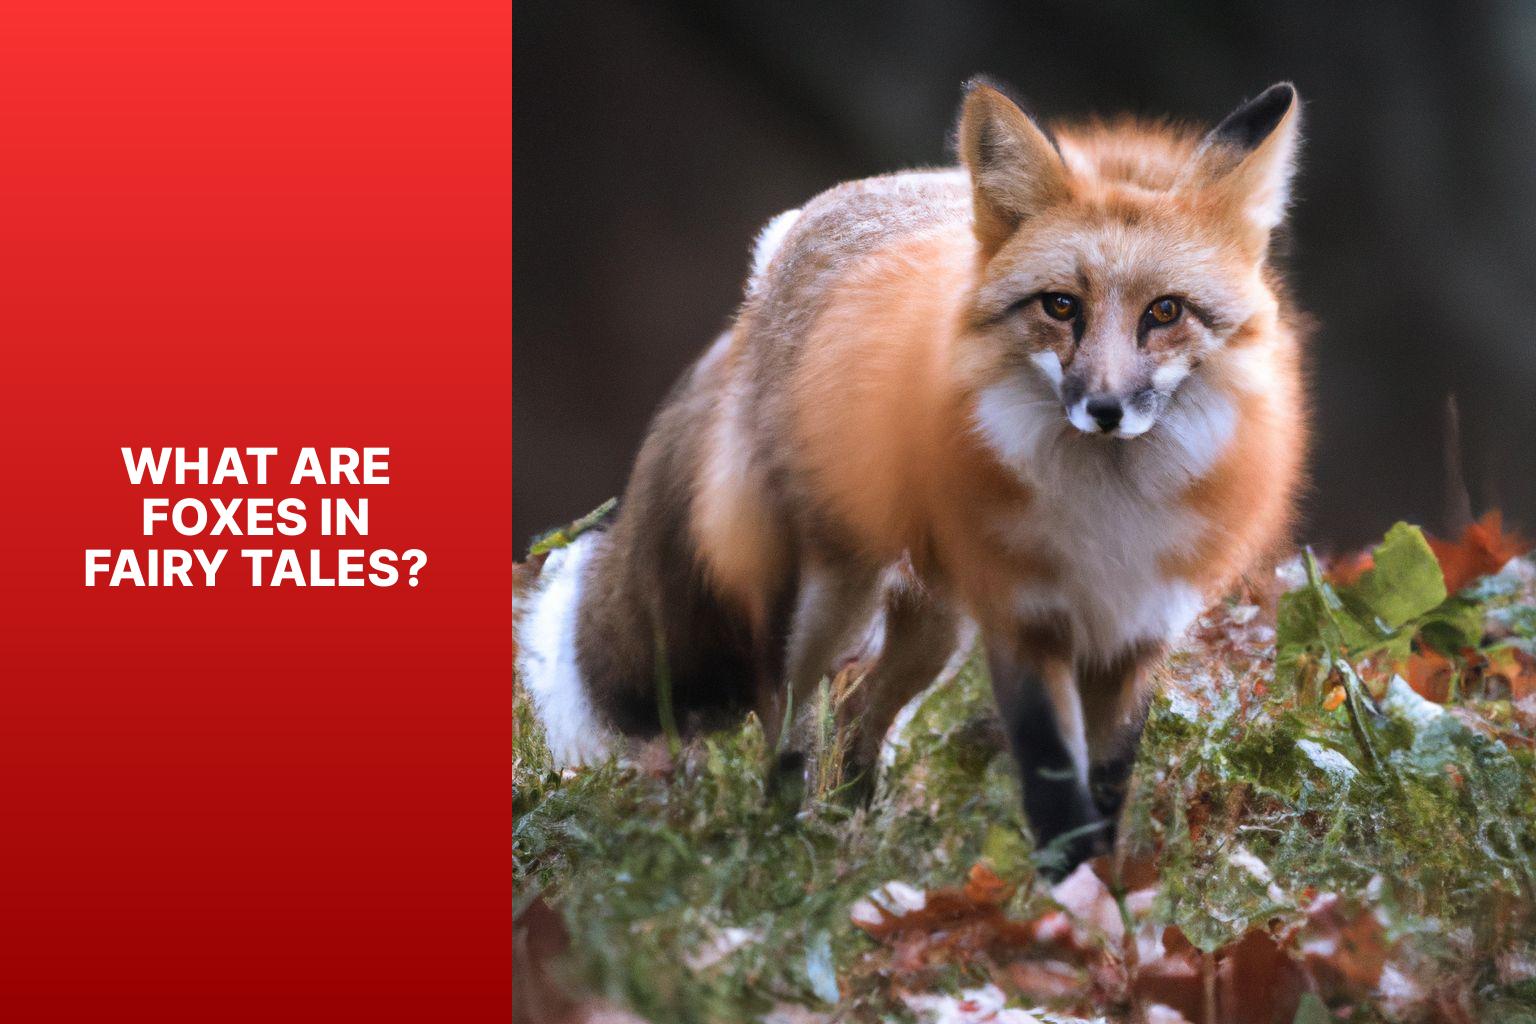 What are Foxes in Fairy Tales? - Fox Myths in Fairy Tales 